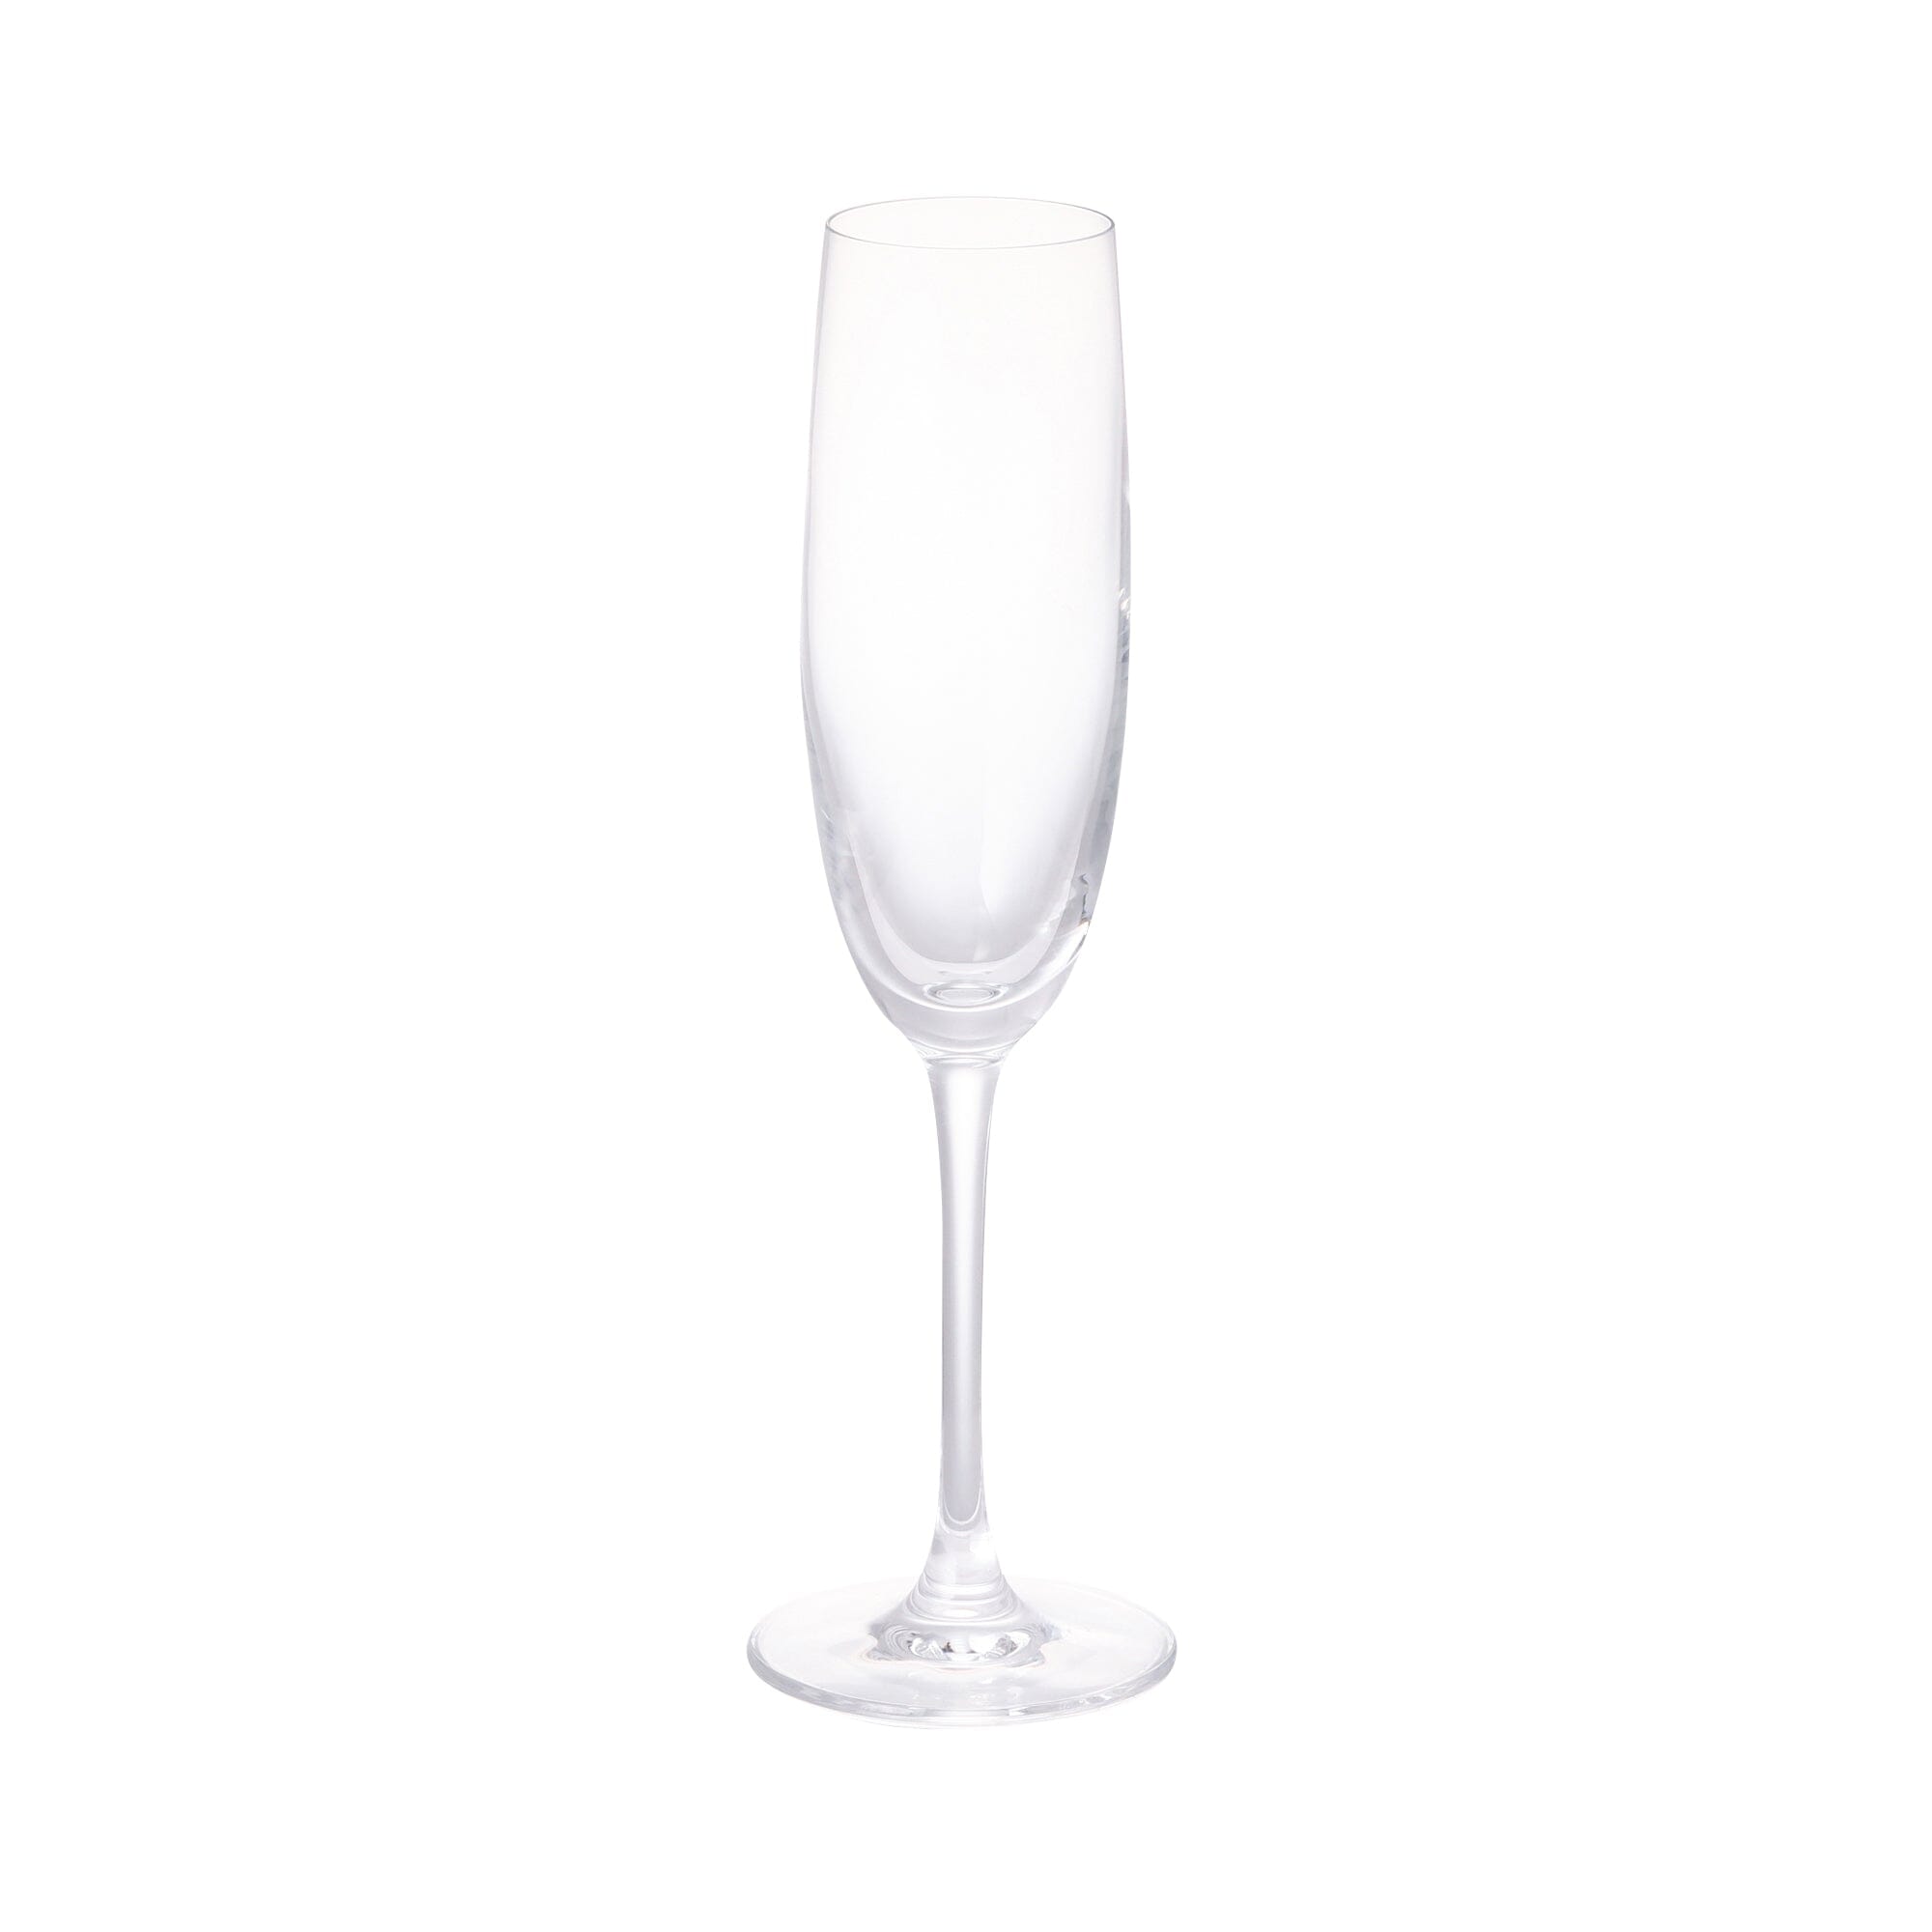 Pair Gift Crystal Champagne Glass